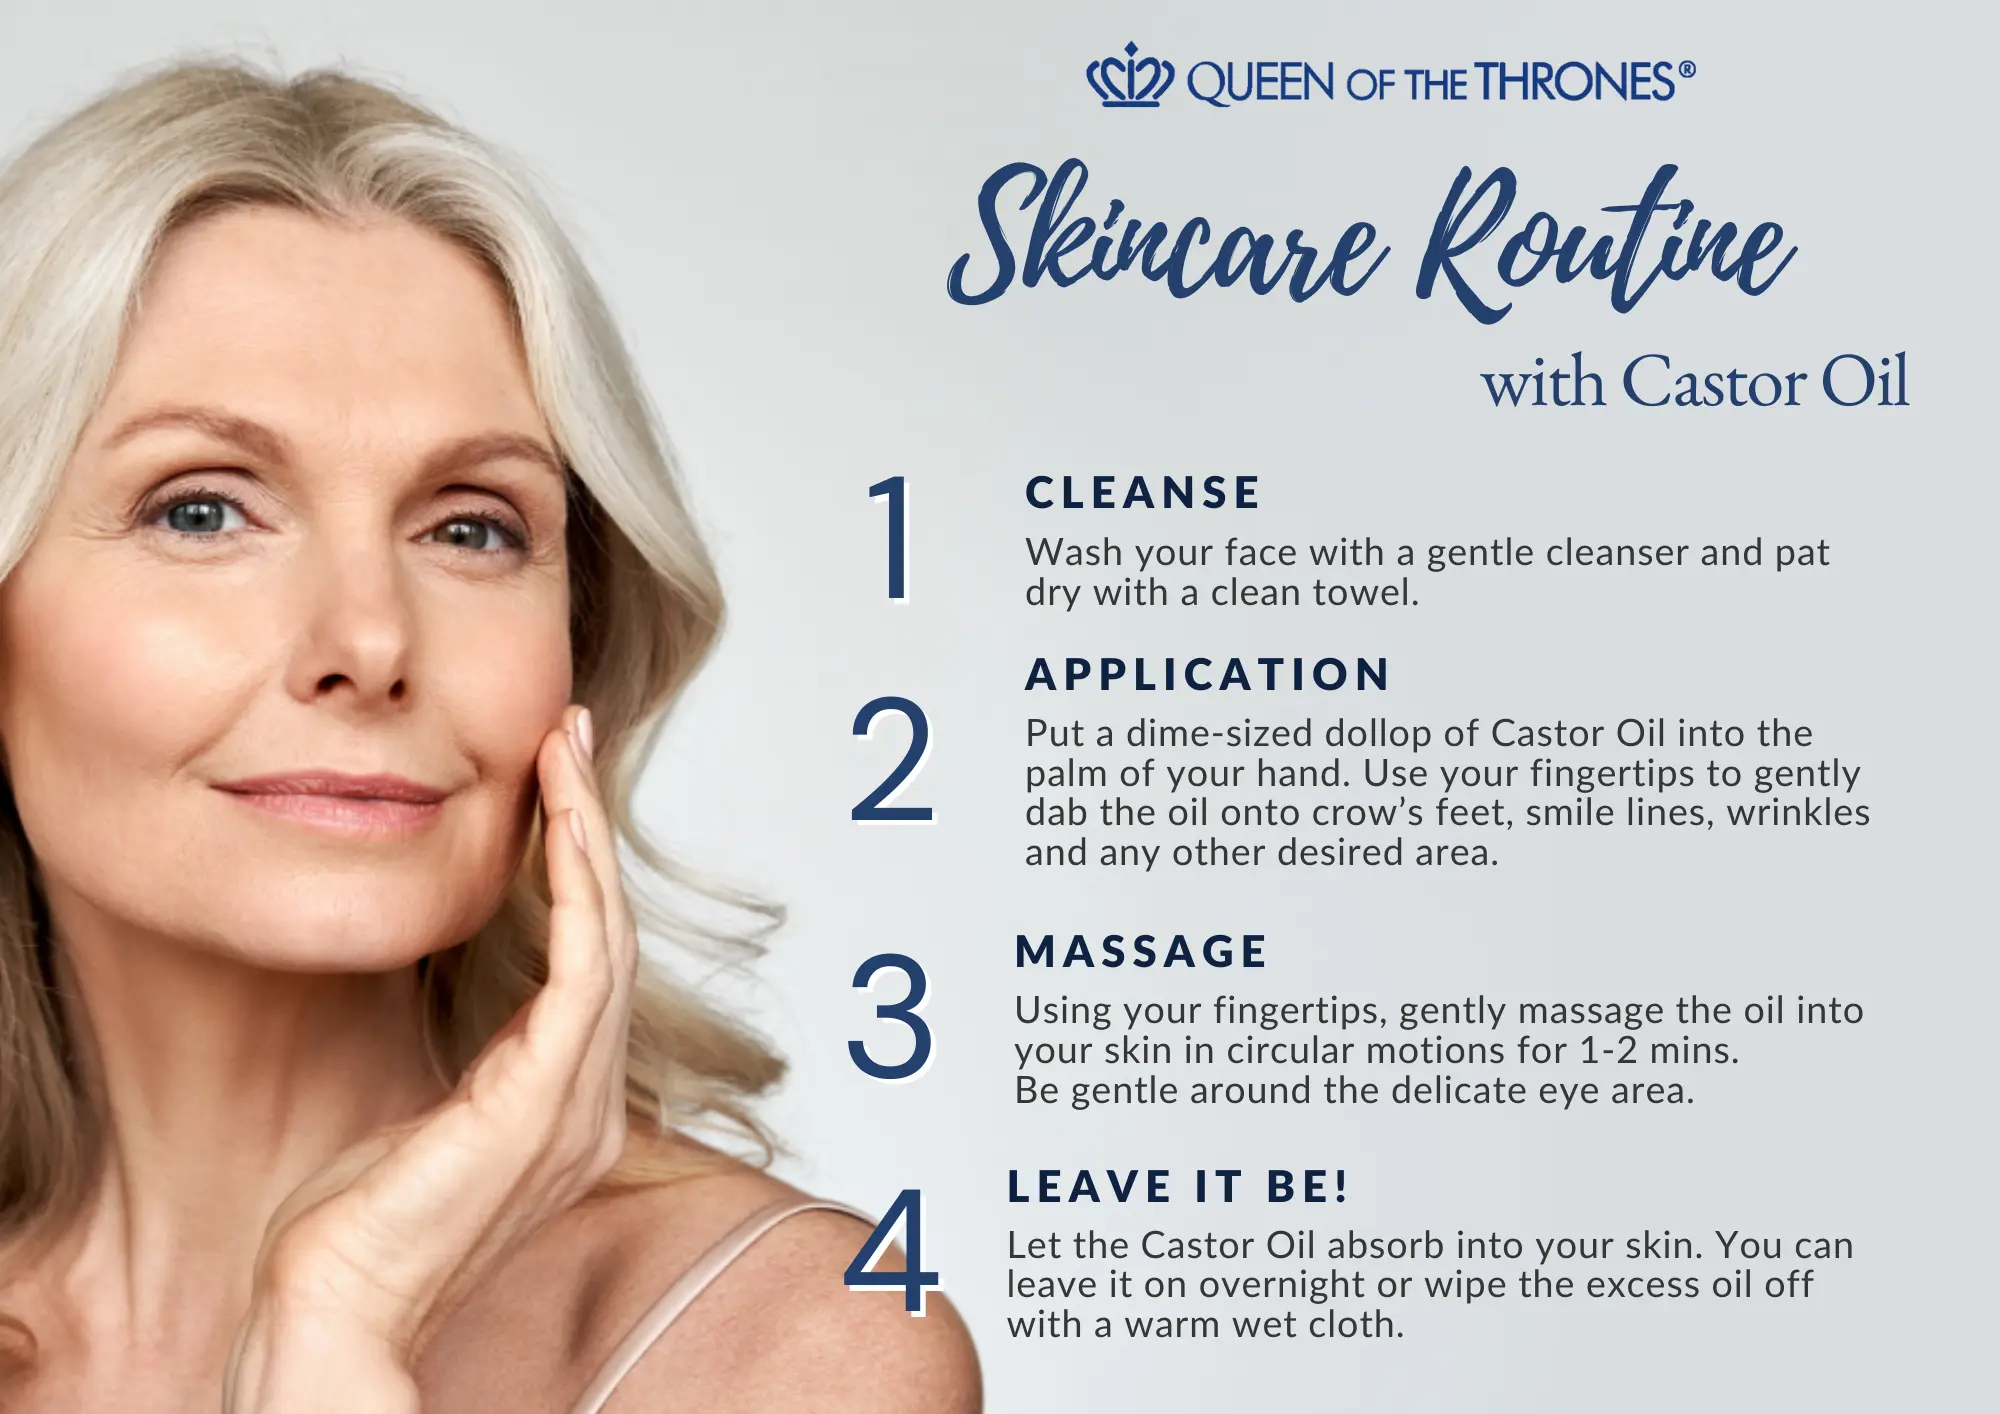 Queen of the Thrones Castor oil skin care routine